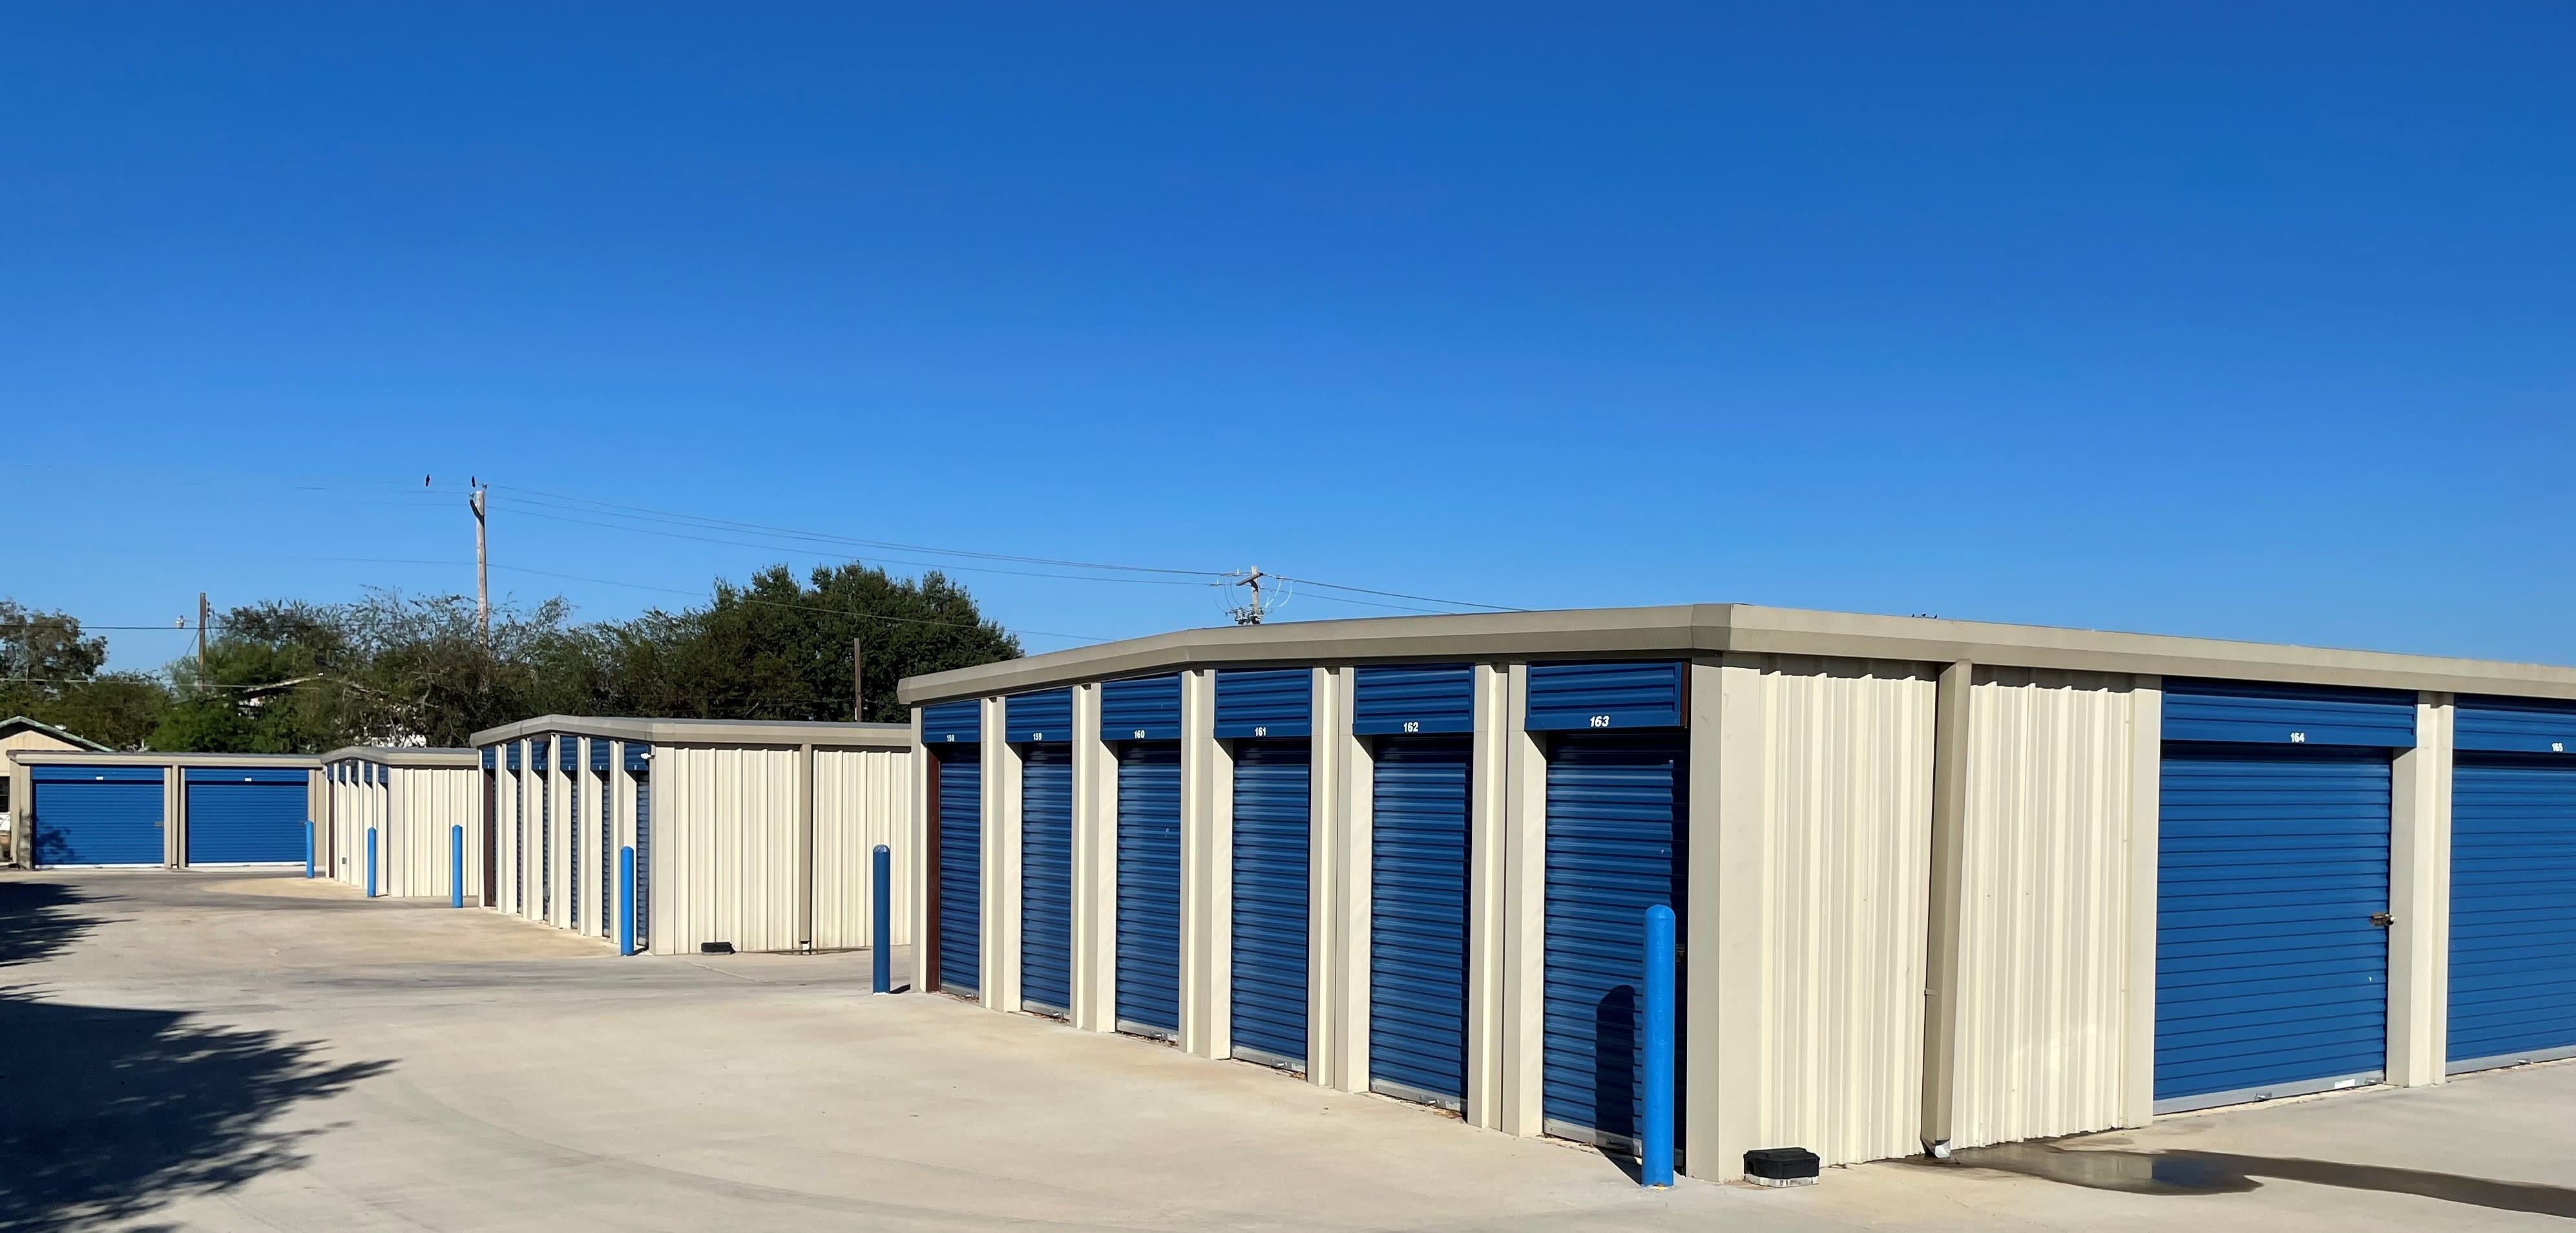 Unit sizes and prices at KO Storage in Pearsall, Texas